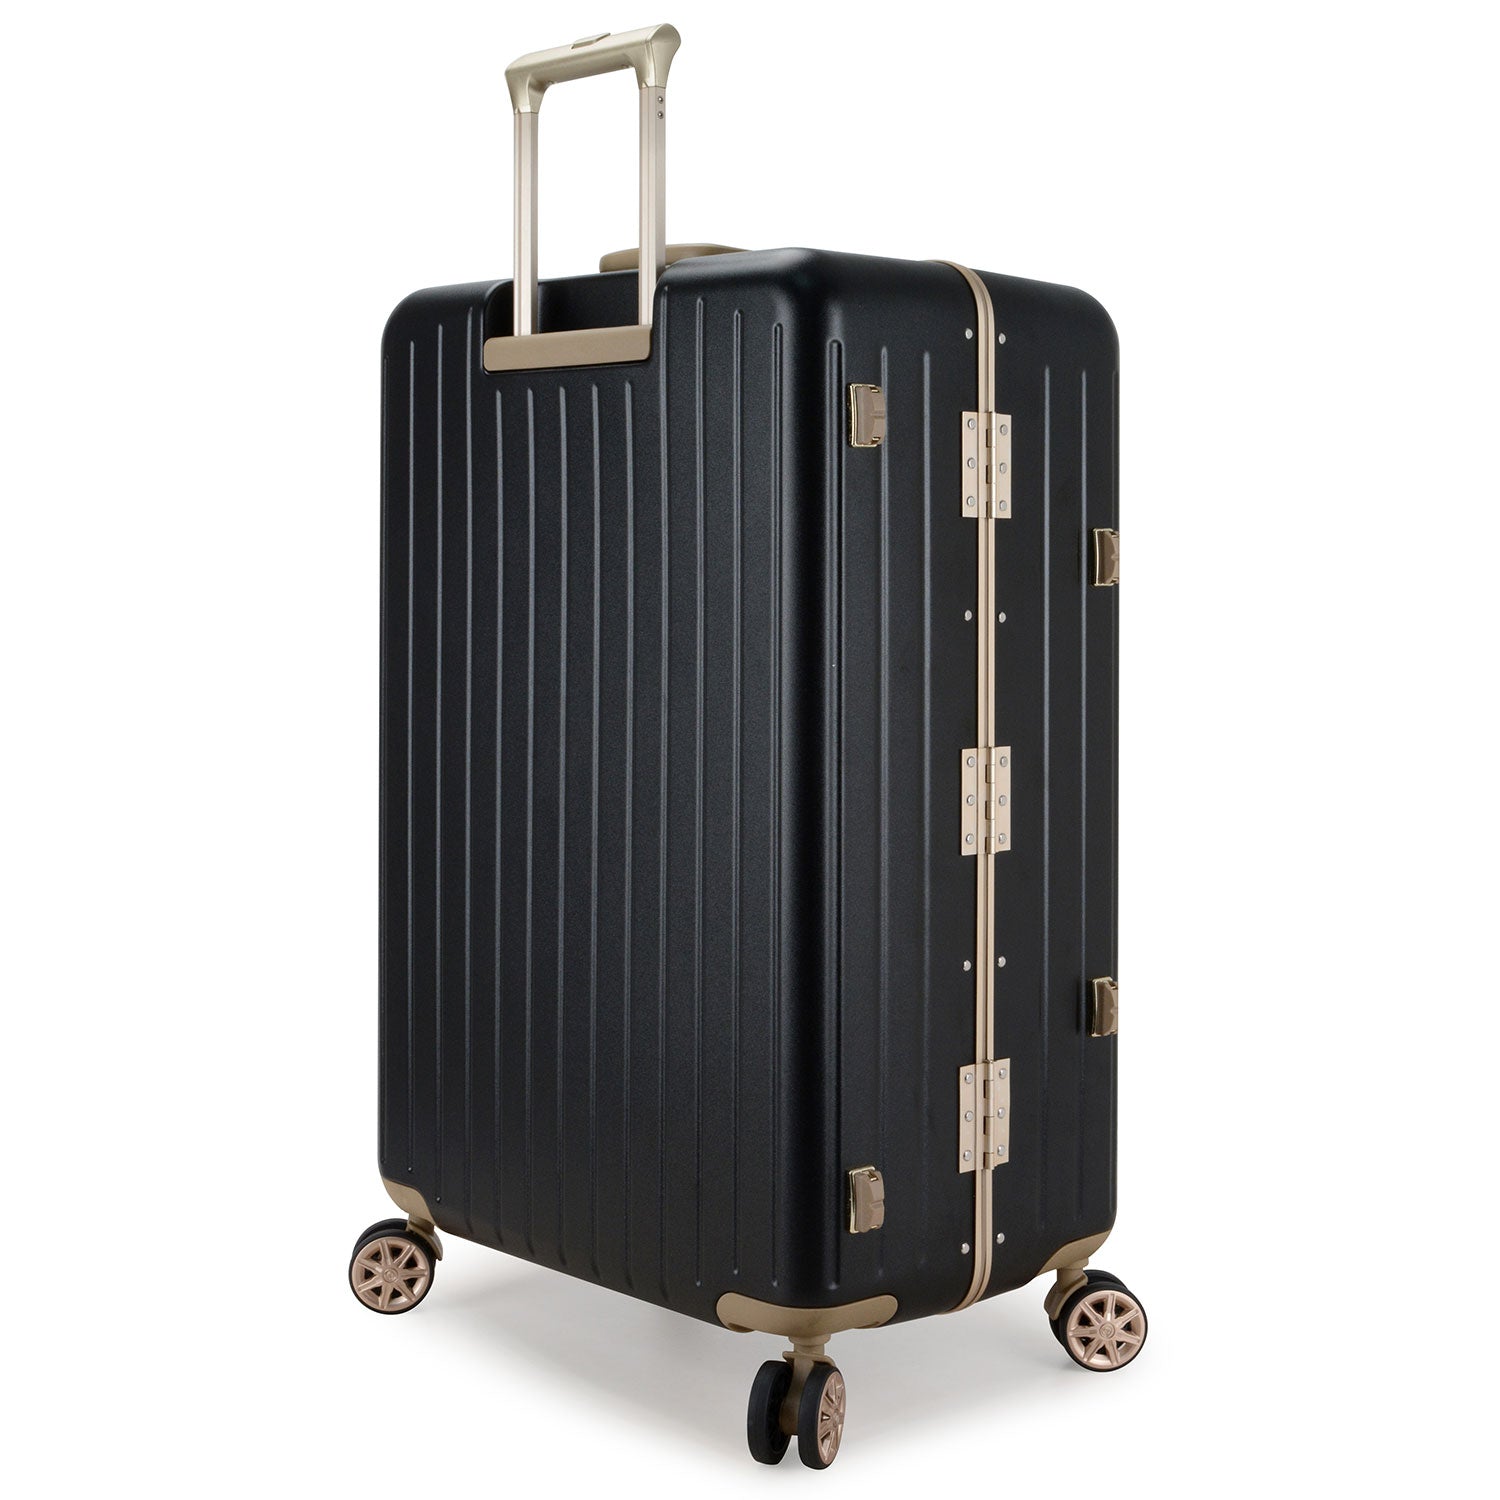 Monaghan 2 Piece Spinner Luggage Set